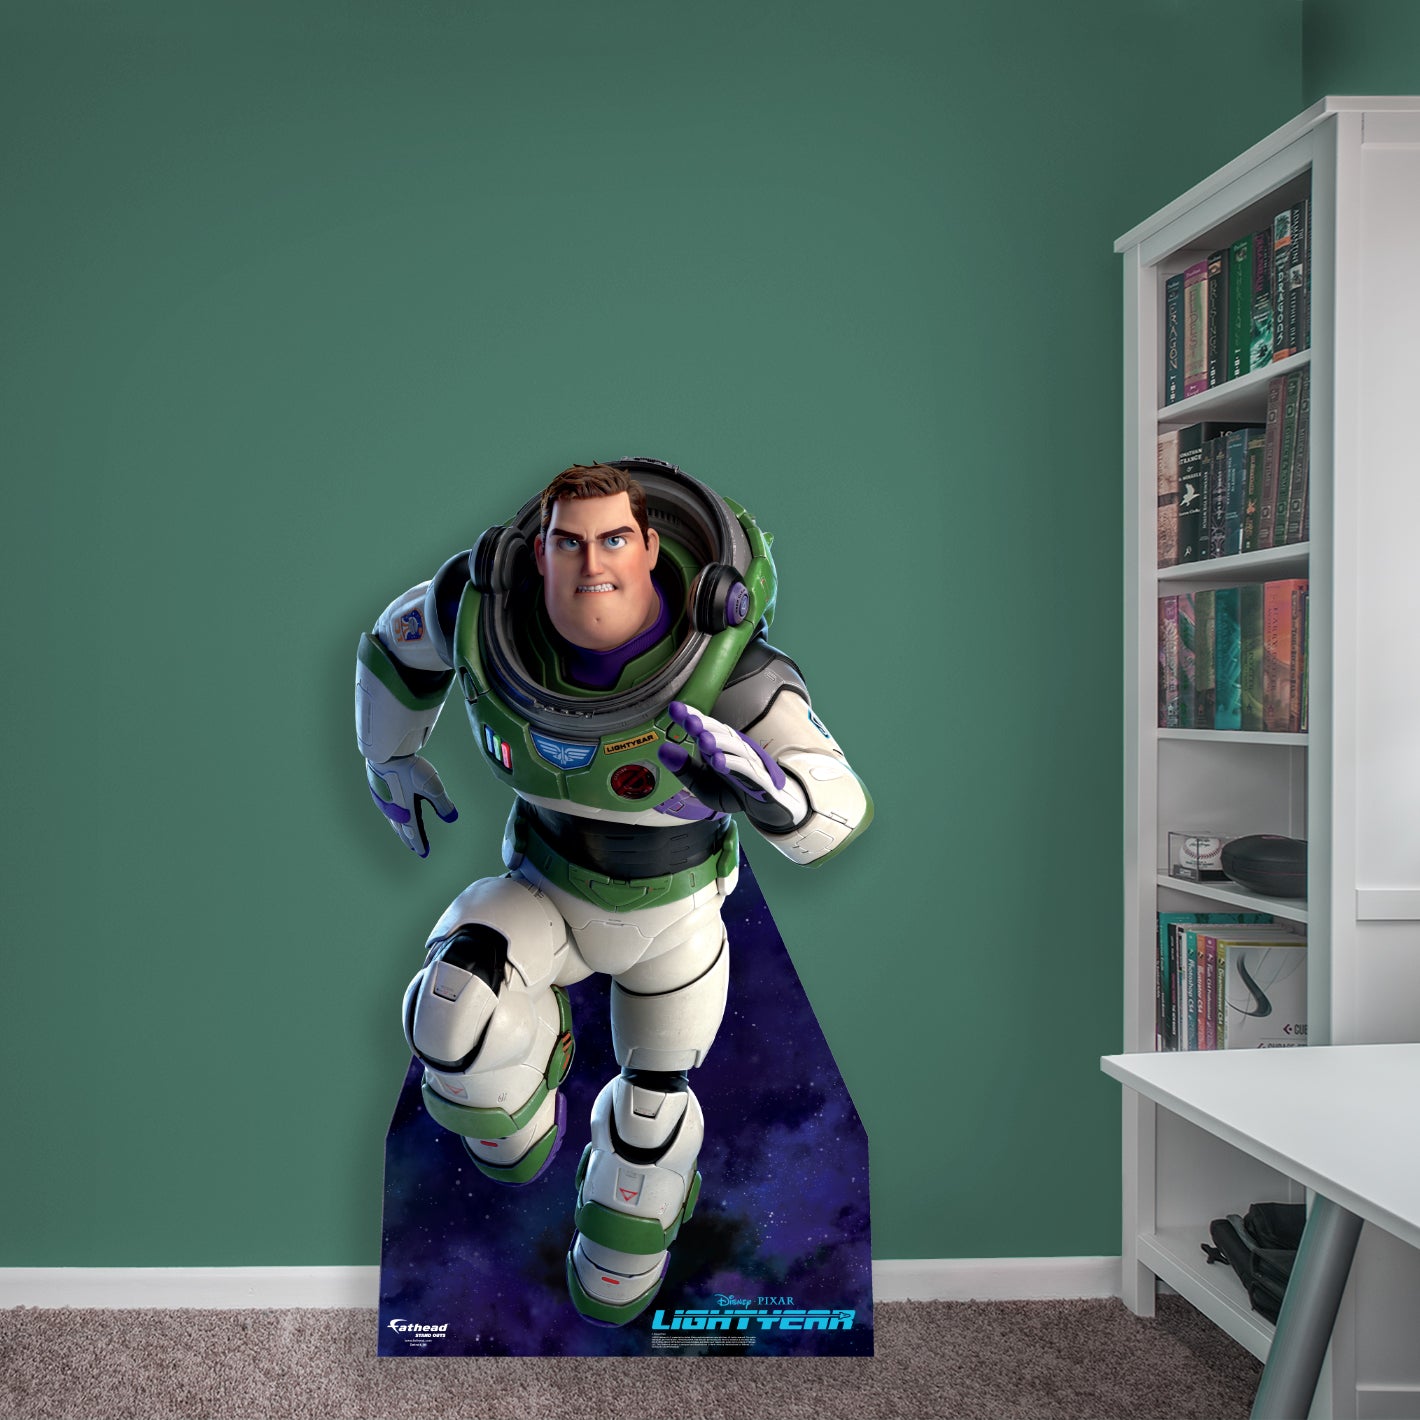 Lightyear: Buzz Lightyear Alpha Suit Life-Size Foam Core Cutout - Officially Licensed Disney Stand Out